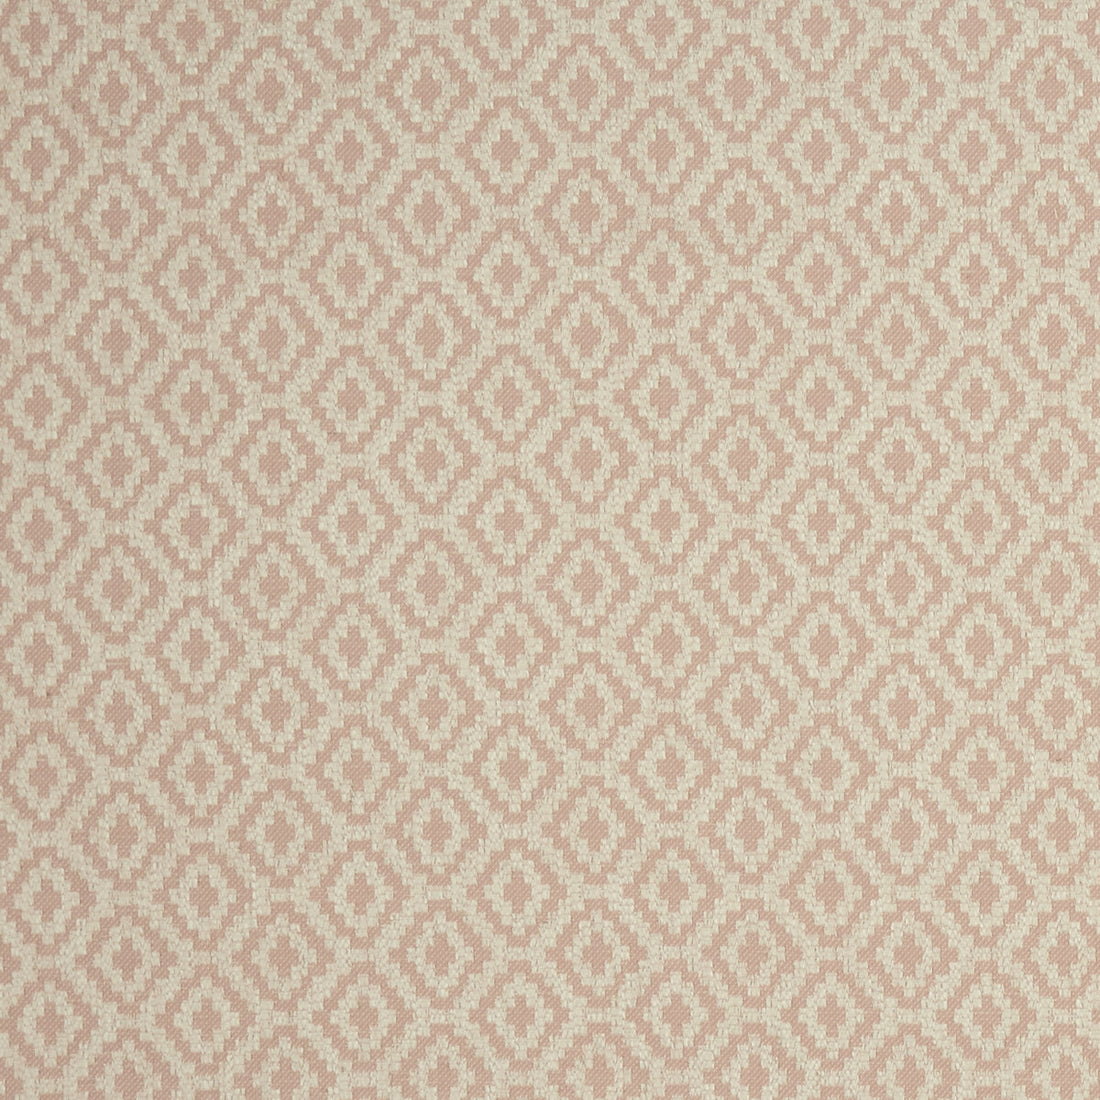 Keaton fabric in blush color - pattern F1045/01.CAC.0 - by Clarke And Clarke in the Clarke &amp; Clarke Castle Garden collection